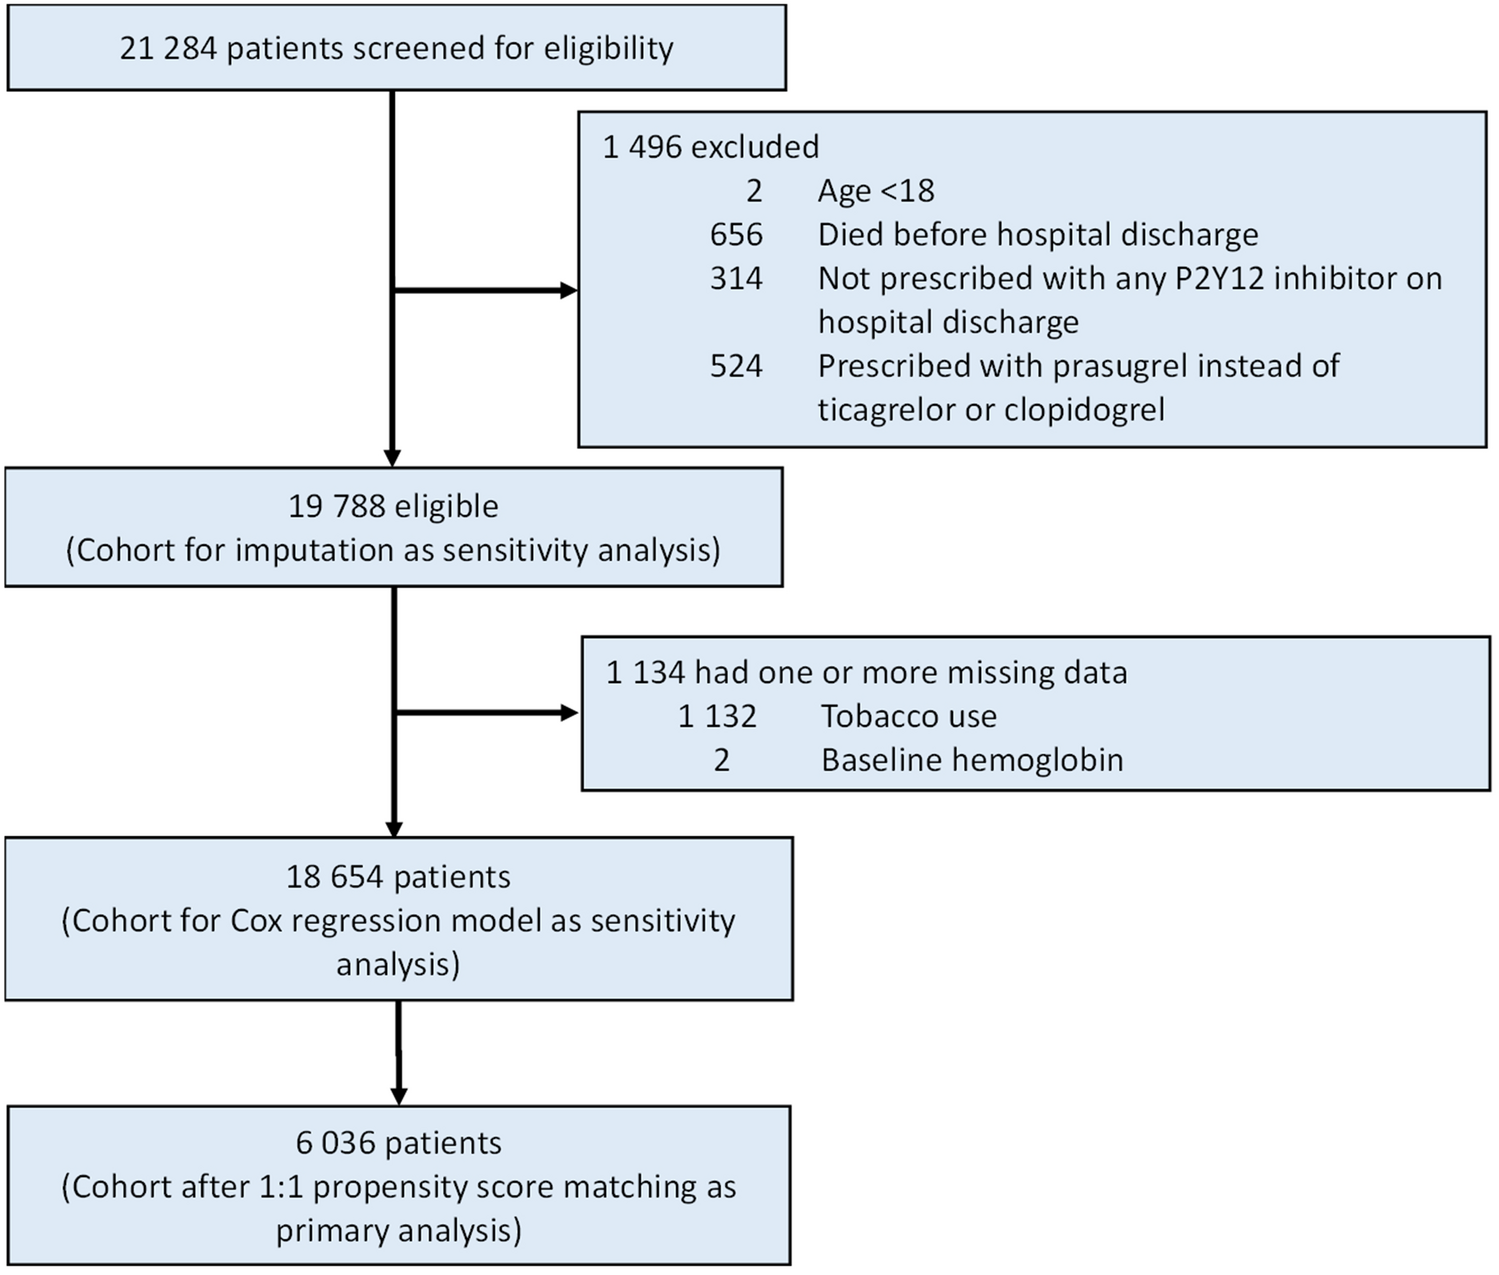 Ticagrelor was associated with lower fracture risk than clopidogrel in the dual anti-platelet regimen among patients with acute coronary syndrome treated with percutaneous coronary intervention